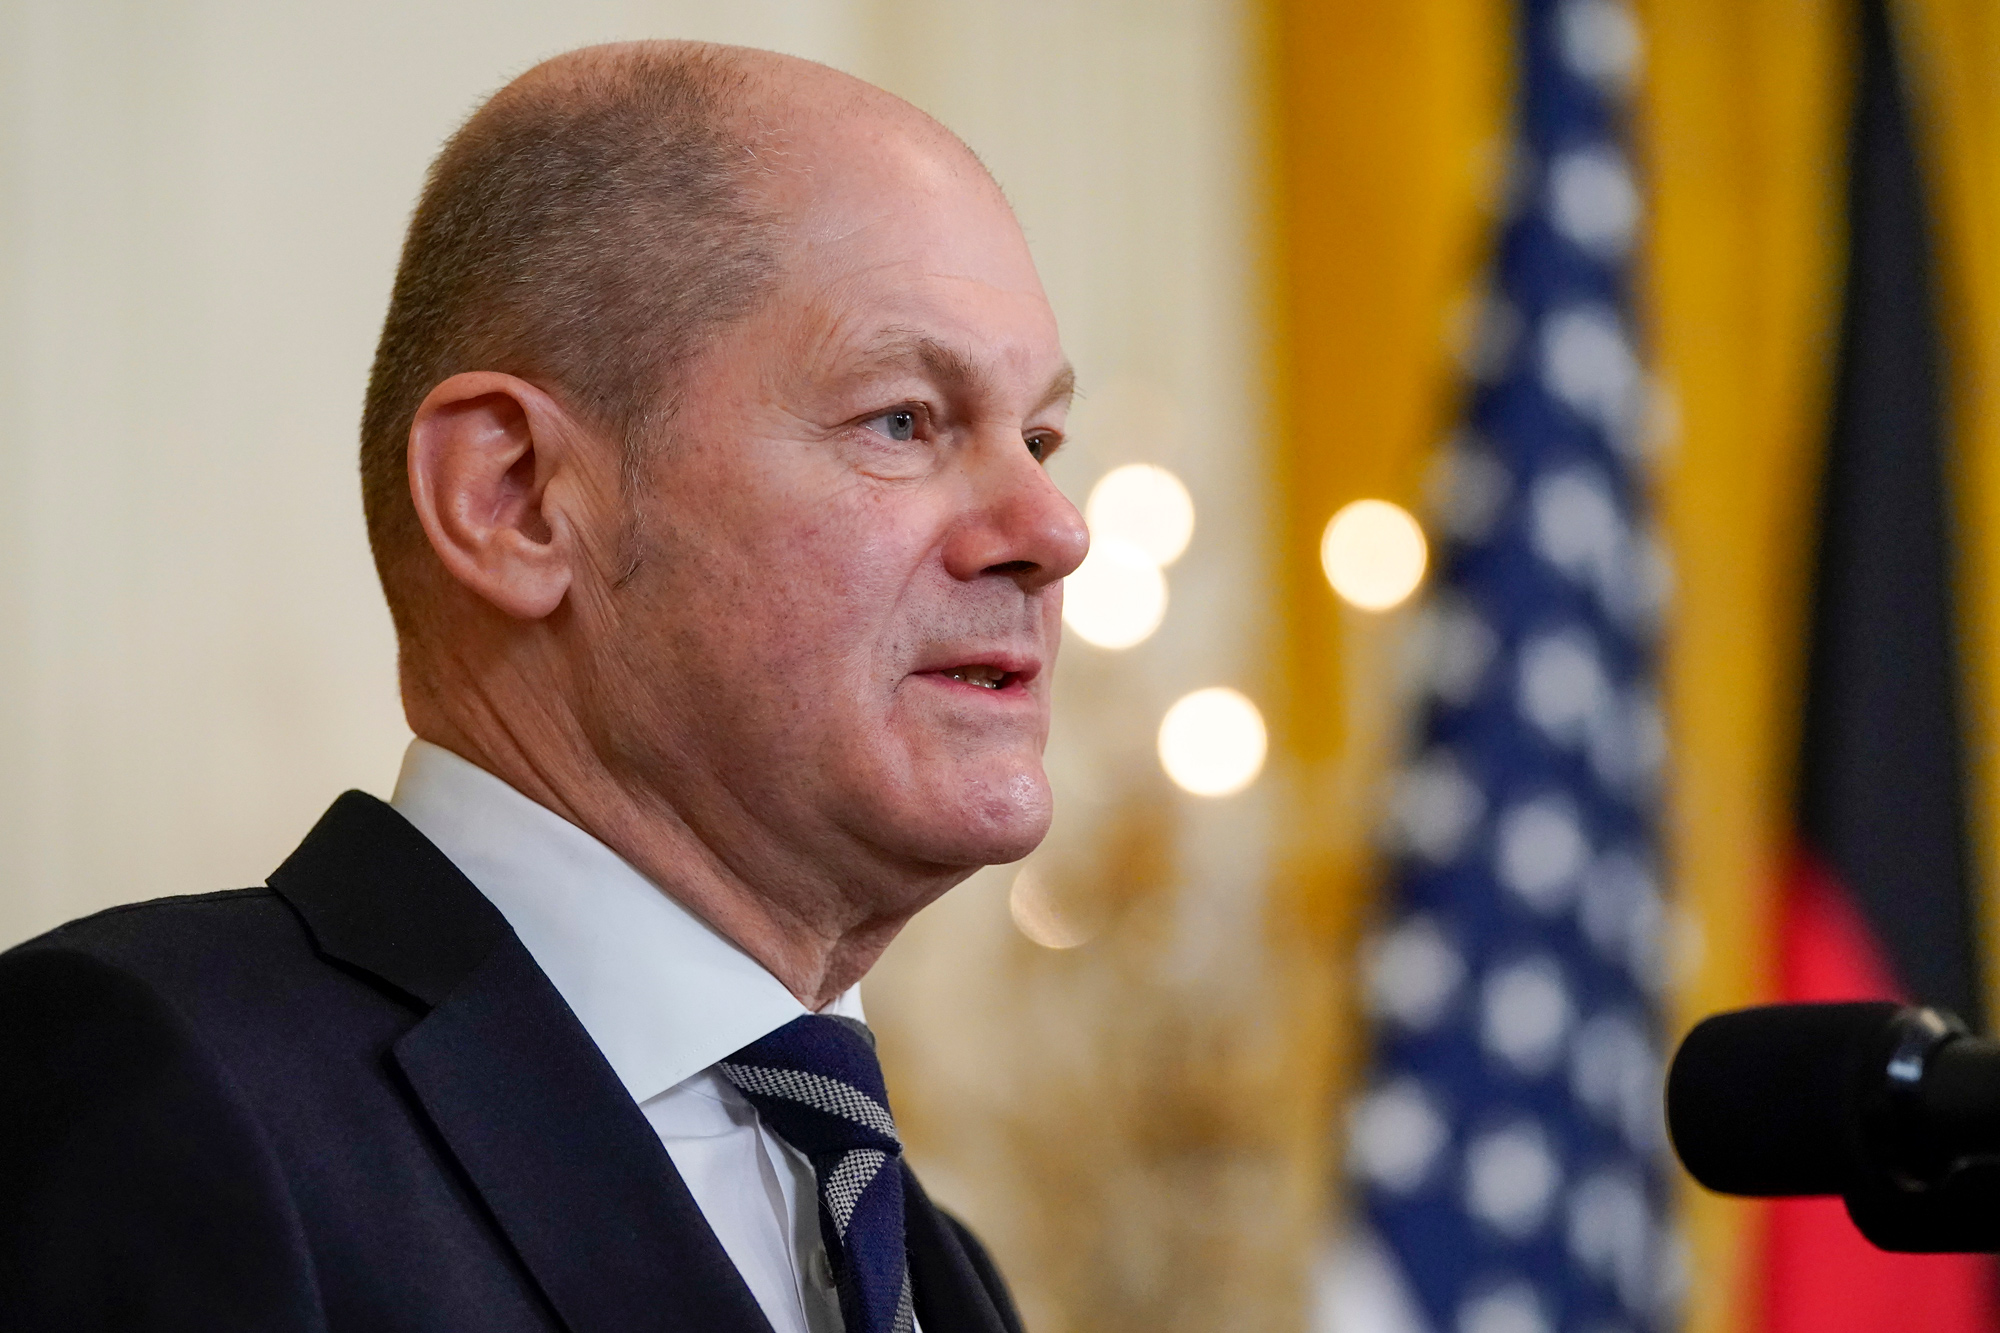 German Chancellor Olaf Scholz speaks during a news conference with President Joe Biden in the East Room of the White House on February 7 in Washington, DC.